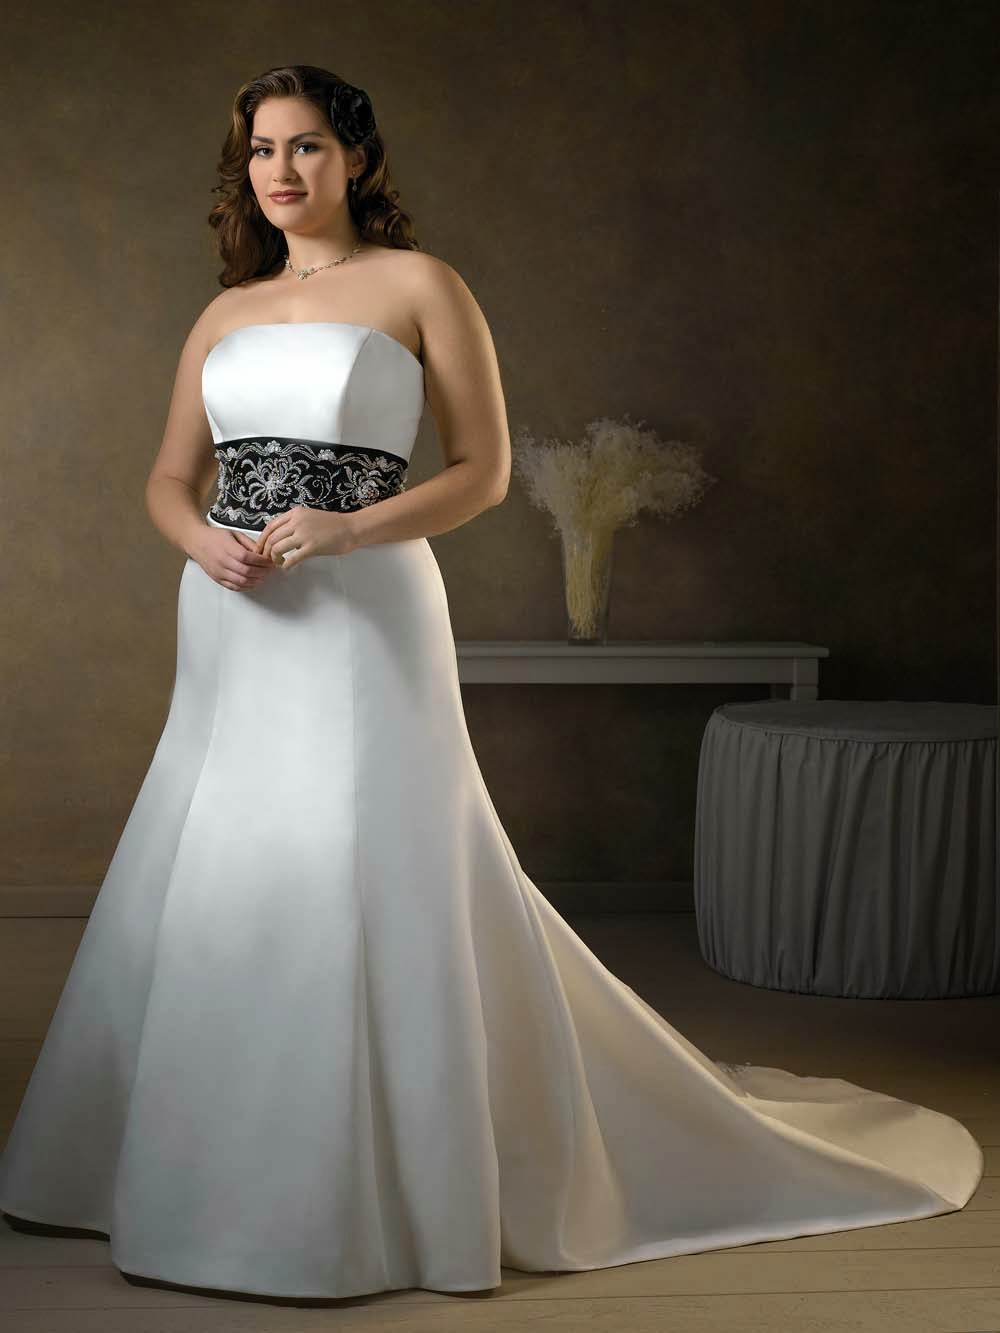 USED WEDDING  GOWN GET HIGH QUALITY PLUS  SIZE  DRESS  WITH 